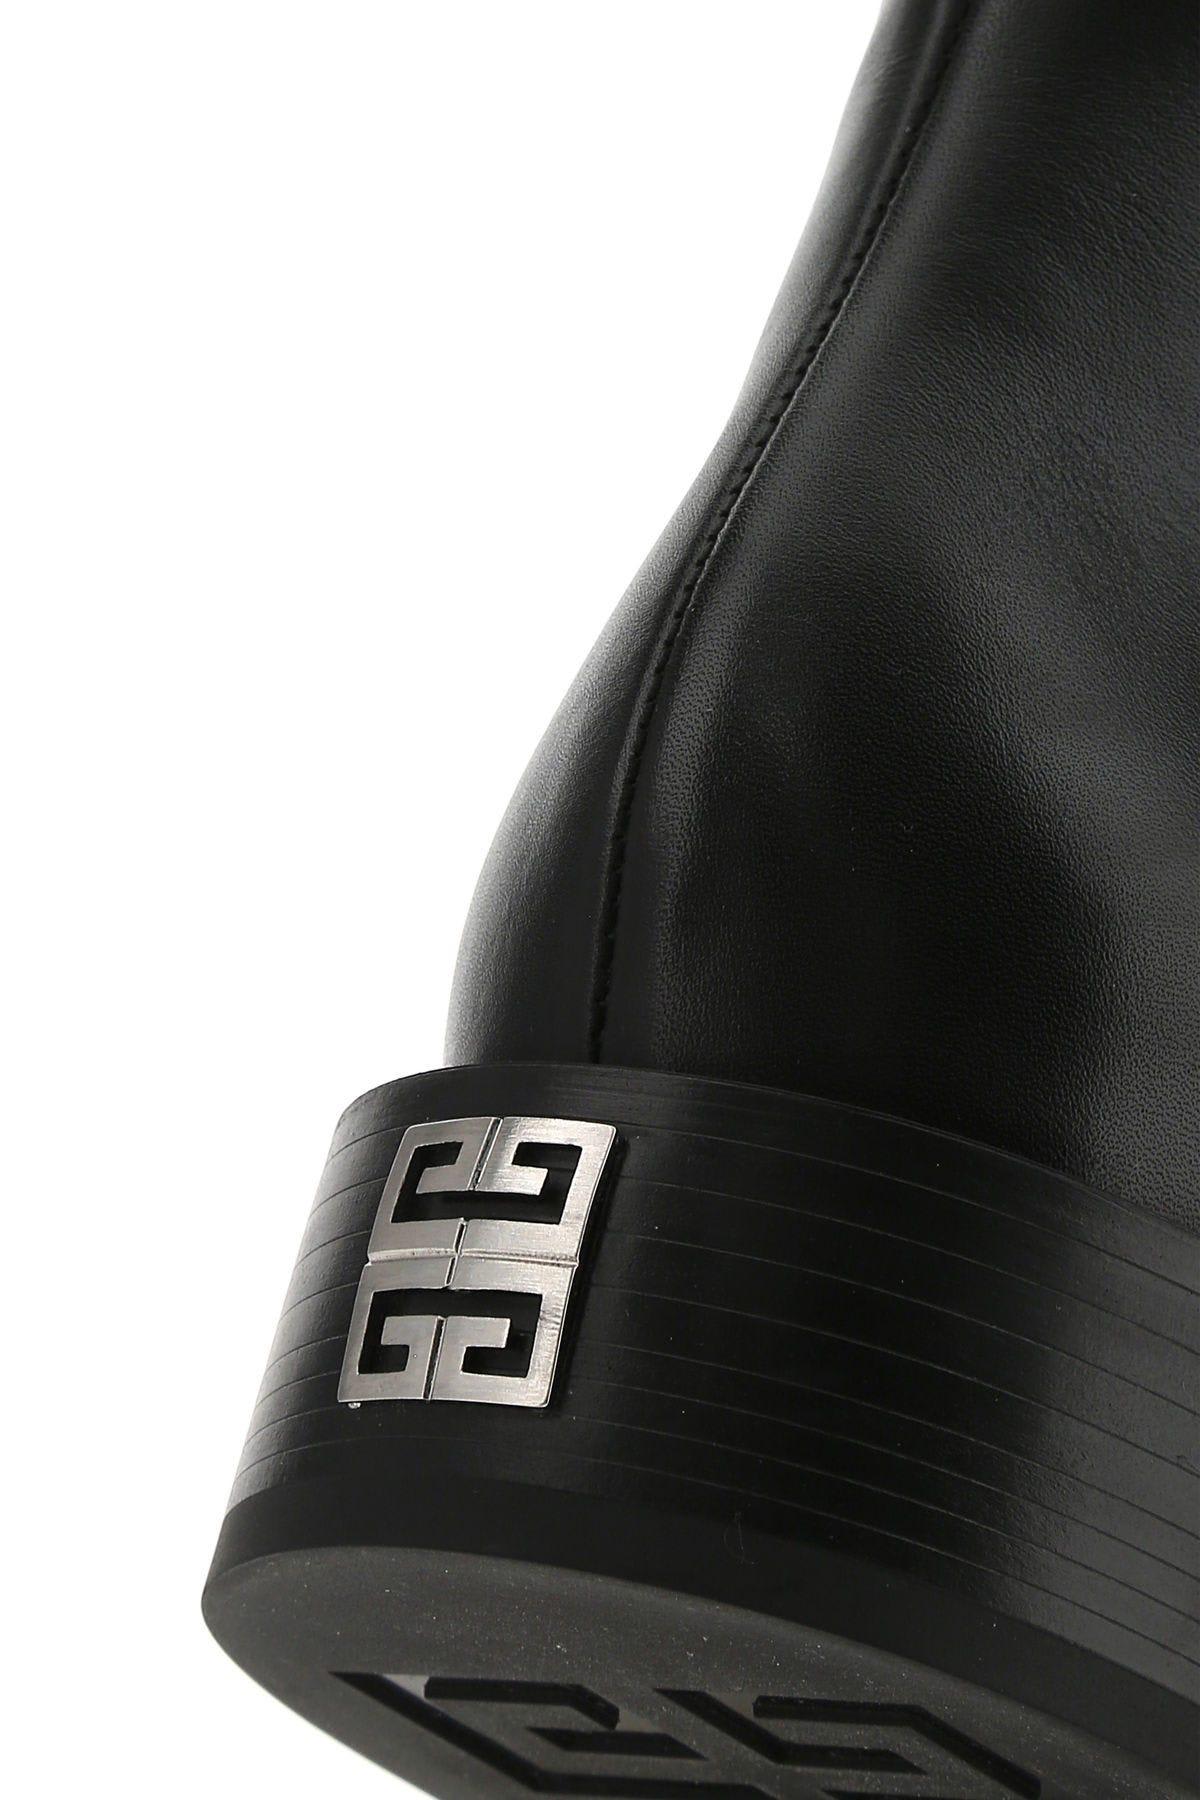 Shop Givenchy Black Leather Boots